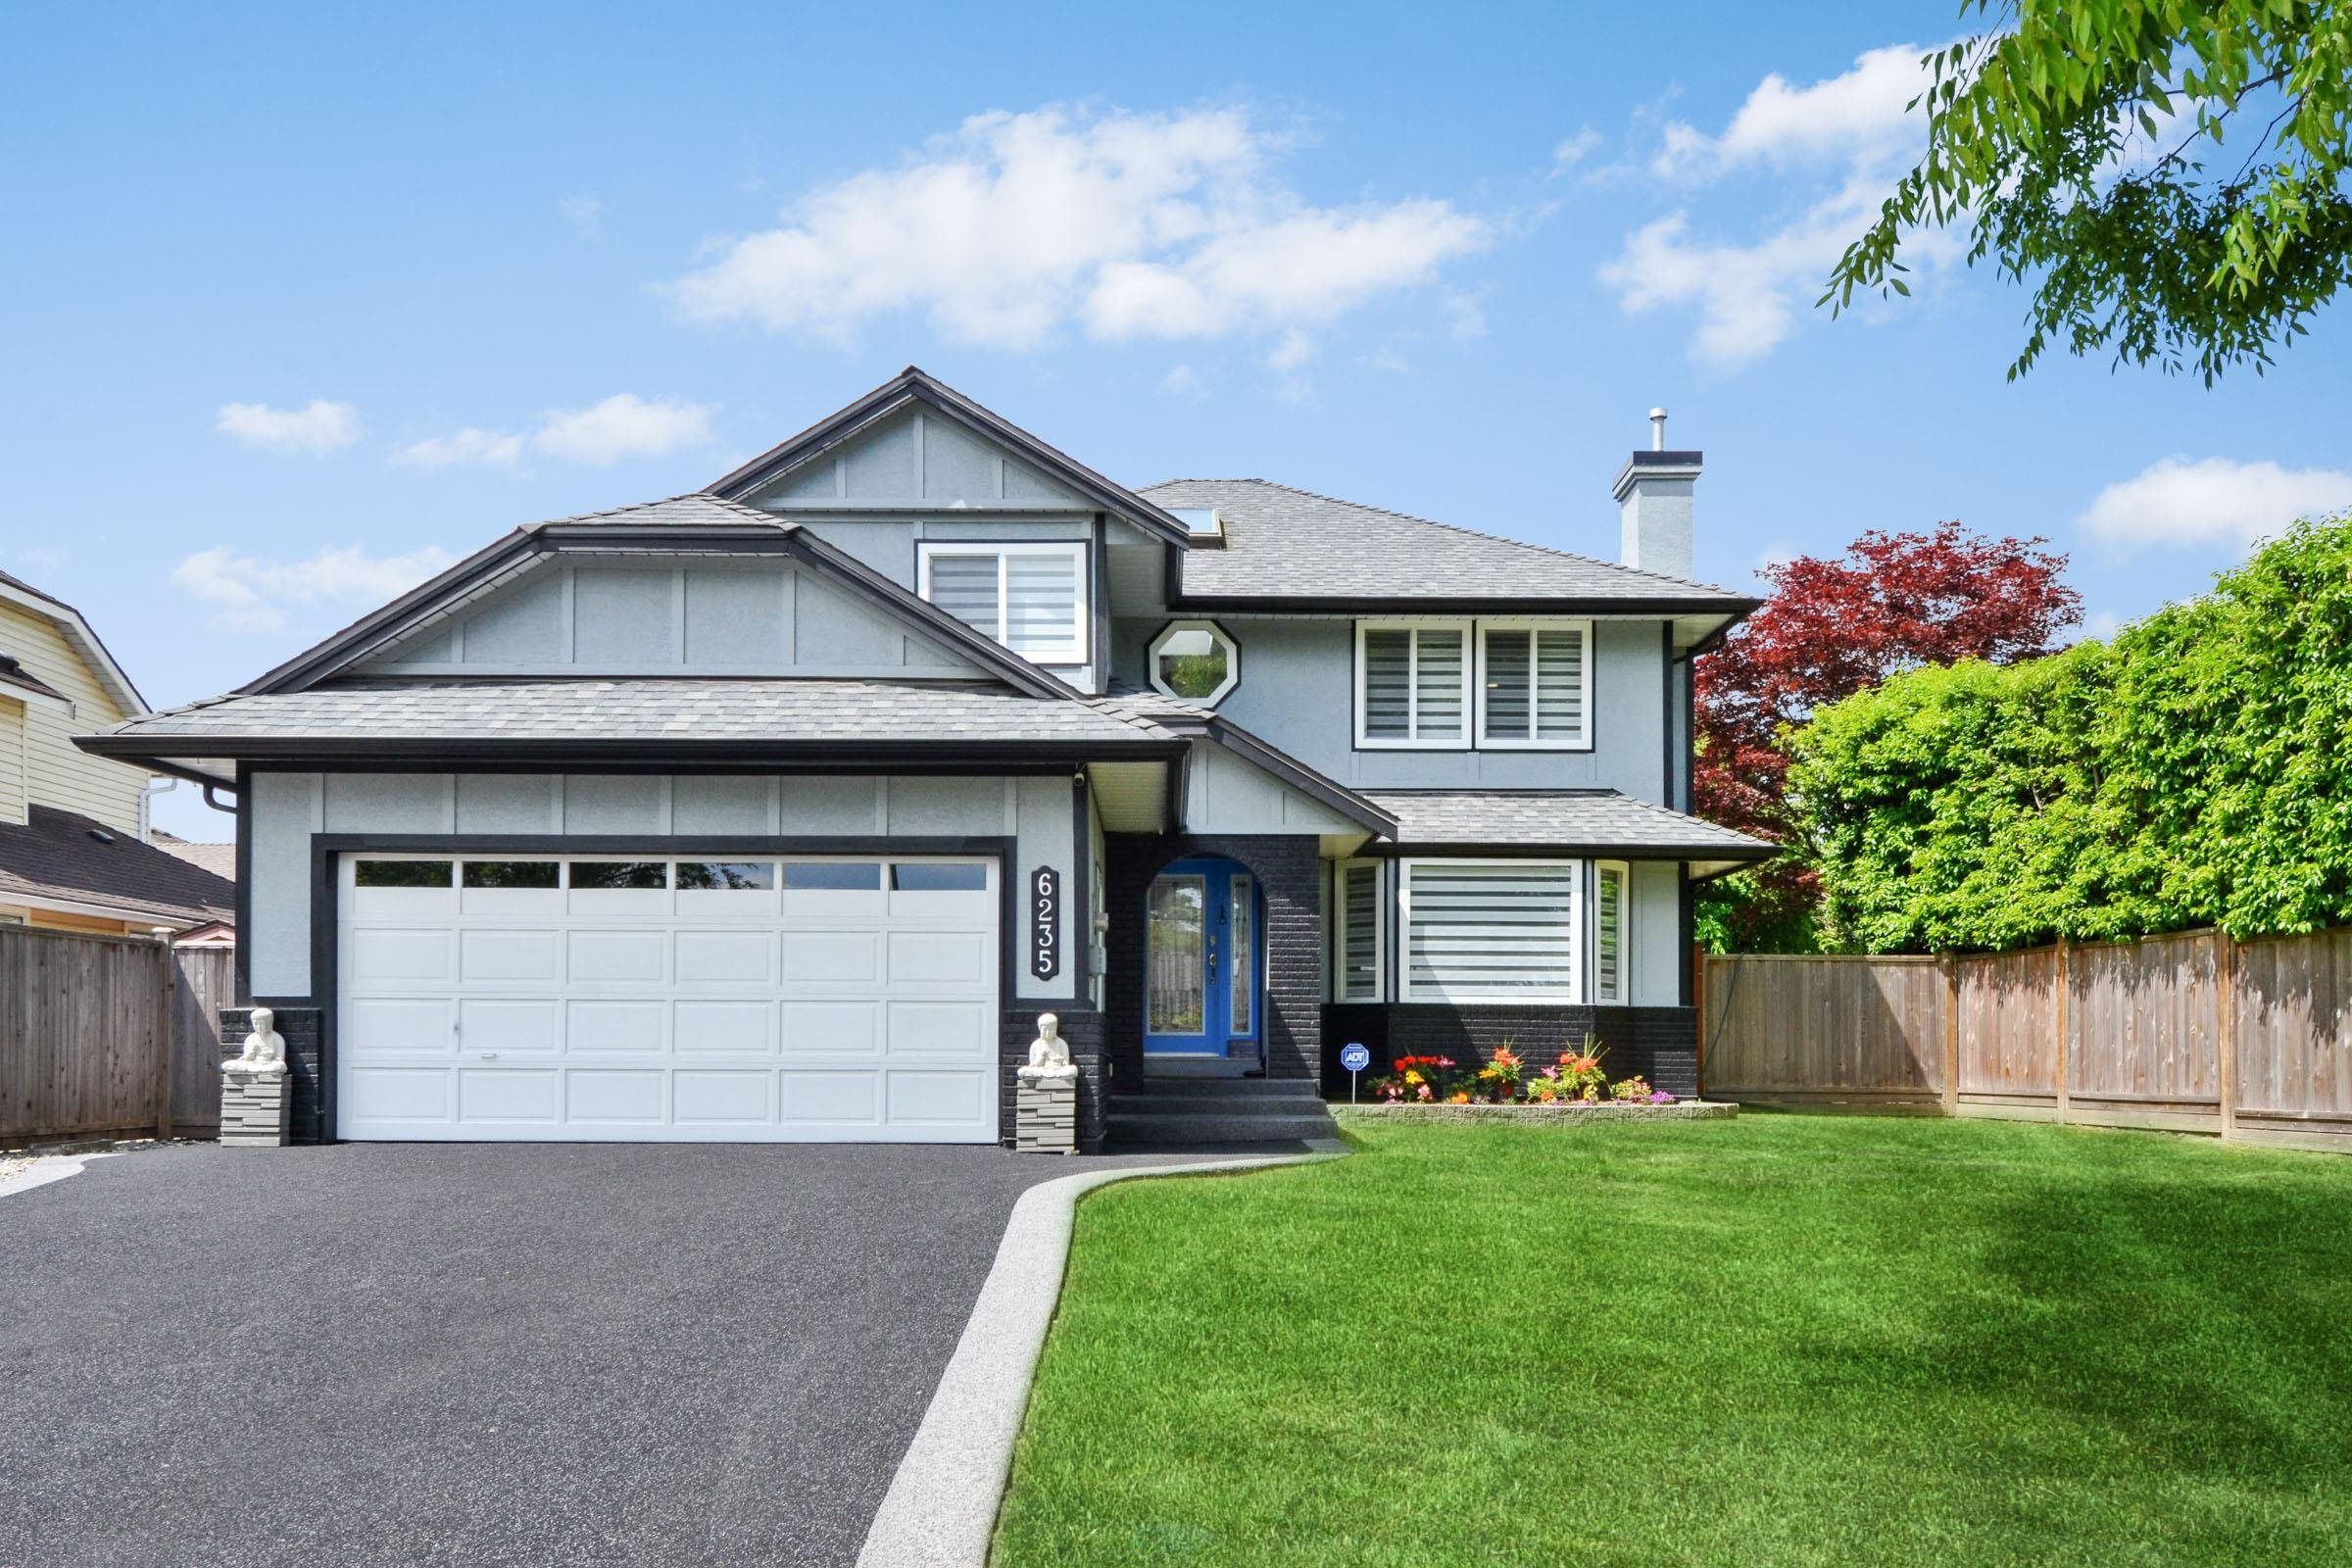 I have sold a property at 6235 189 ST in Surrey
